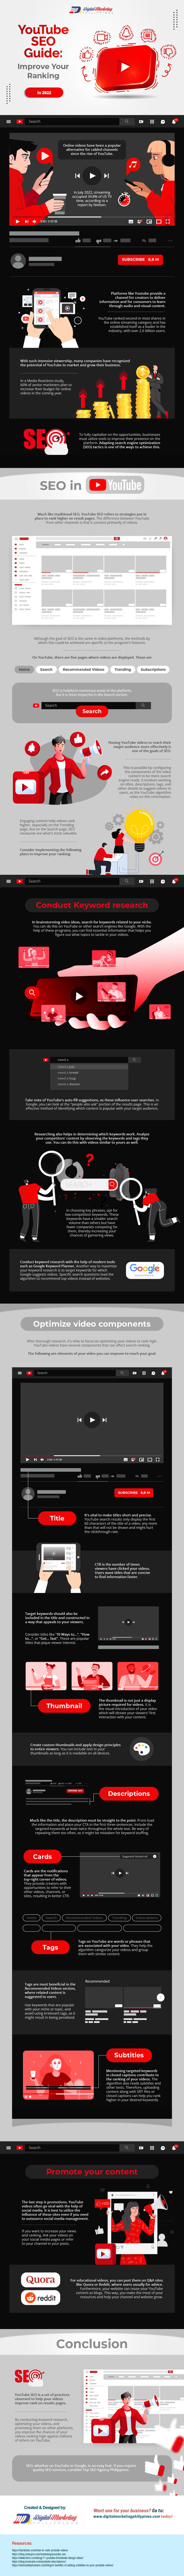 Youtube SEO Guide Infographic